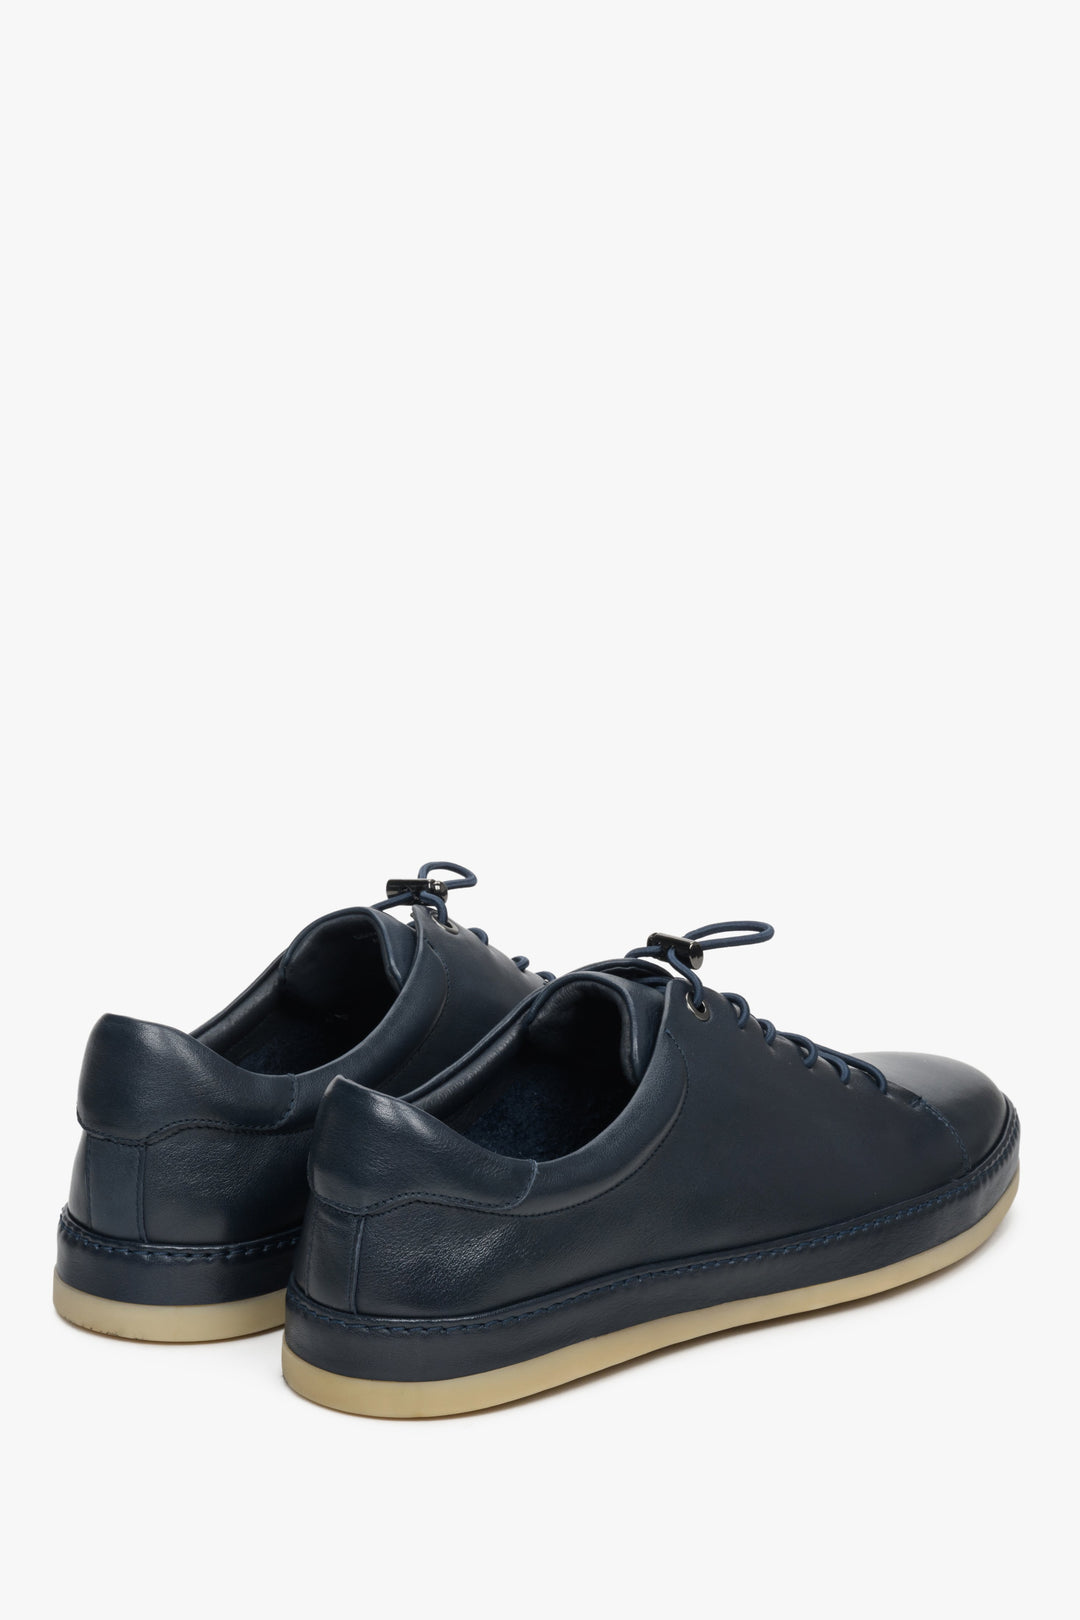 Men's Estro leather sneakers in navy blue - presentation of the heel and side seam of the shoes.